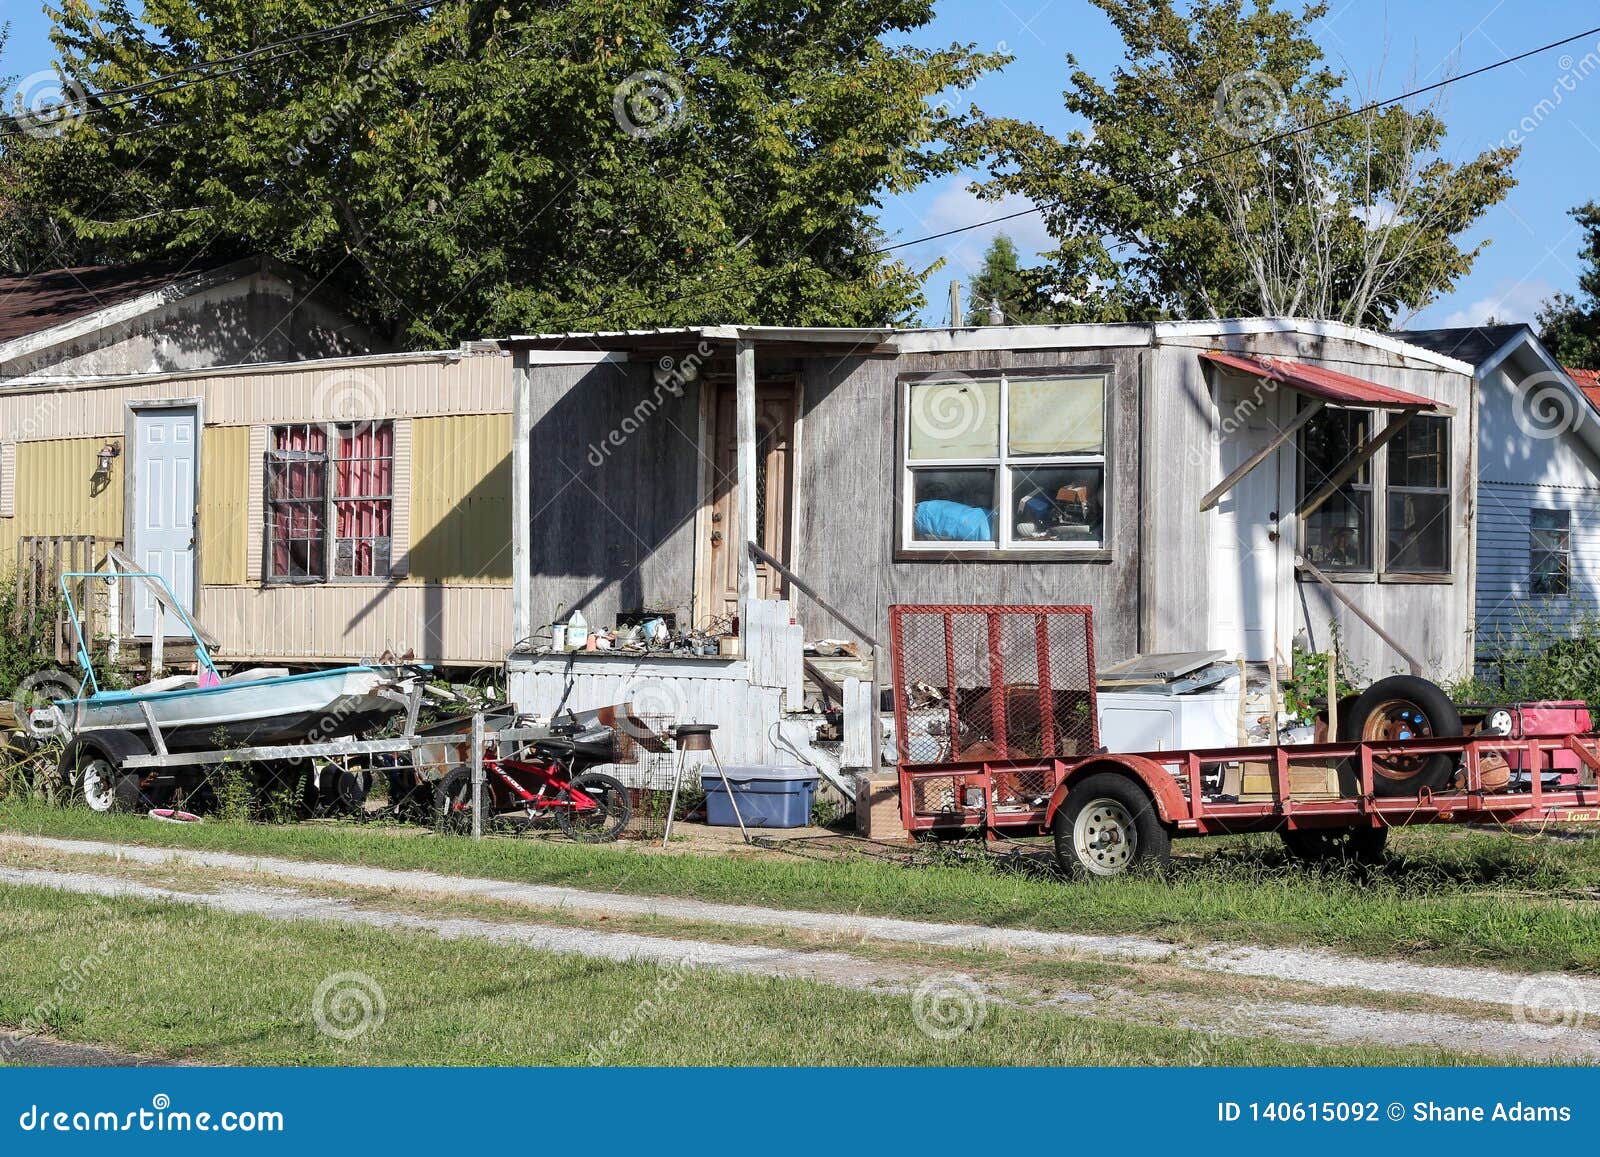 dilapidated-old-trailer-golden-meadow-lo